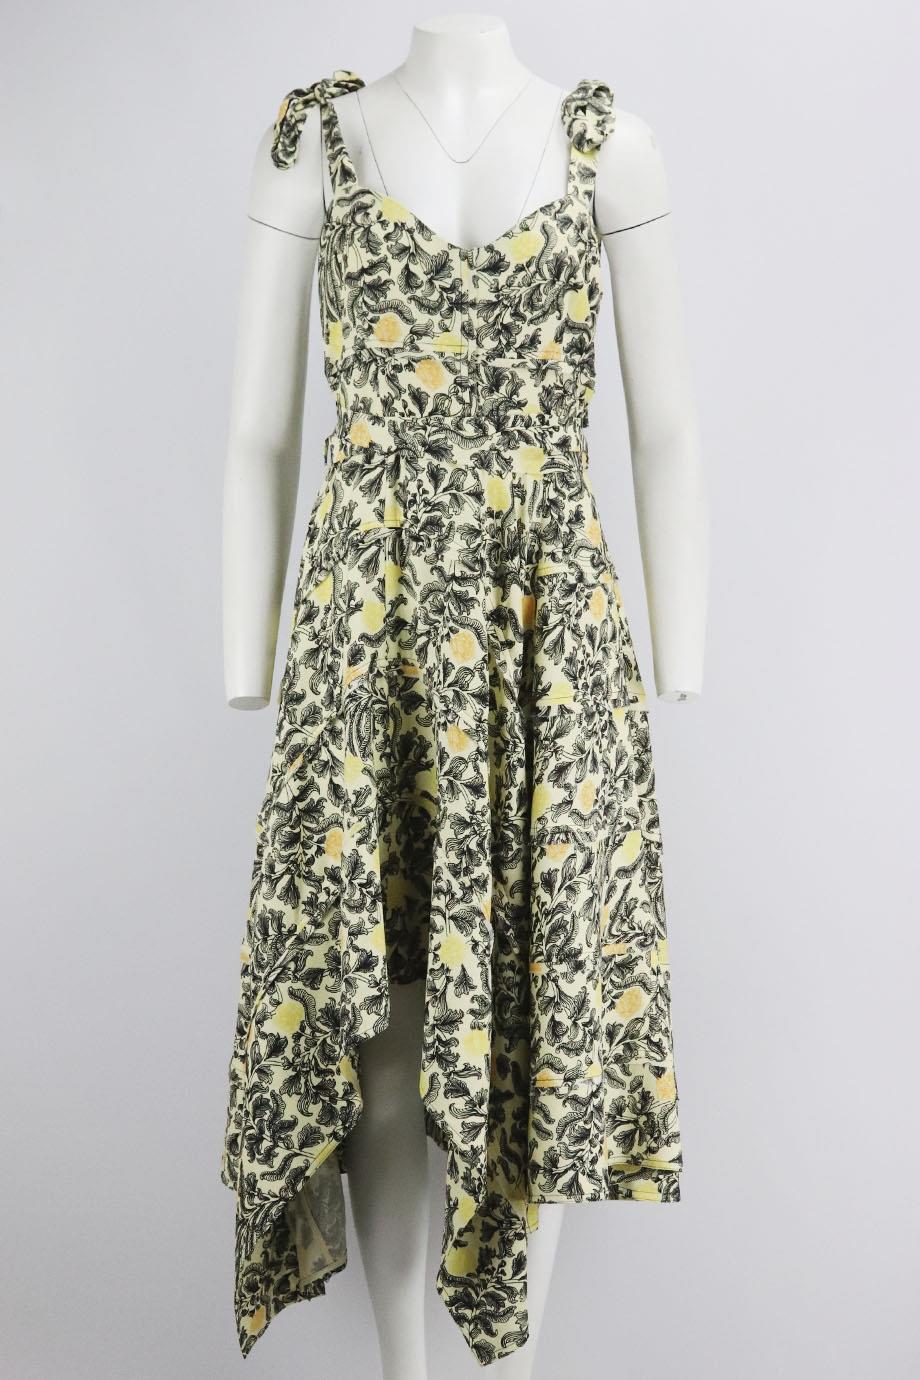 Proenza Schouler asymmetric floral print crepe midi dress. Yellow, black and orange. Sleeveless, v-neck. Zip fastening at back. 100% Viscose; lining: 100% silk. Size: US 8 (UK 12, FR 40, IT 44). Bust: 34 in. Waist: 30.5 in. Hips: 65 in. Length: 51